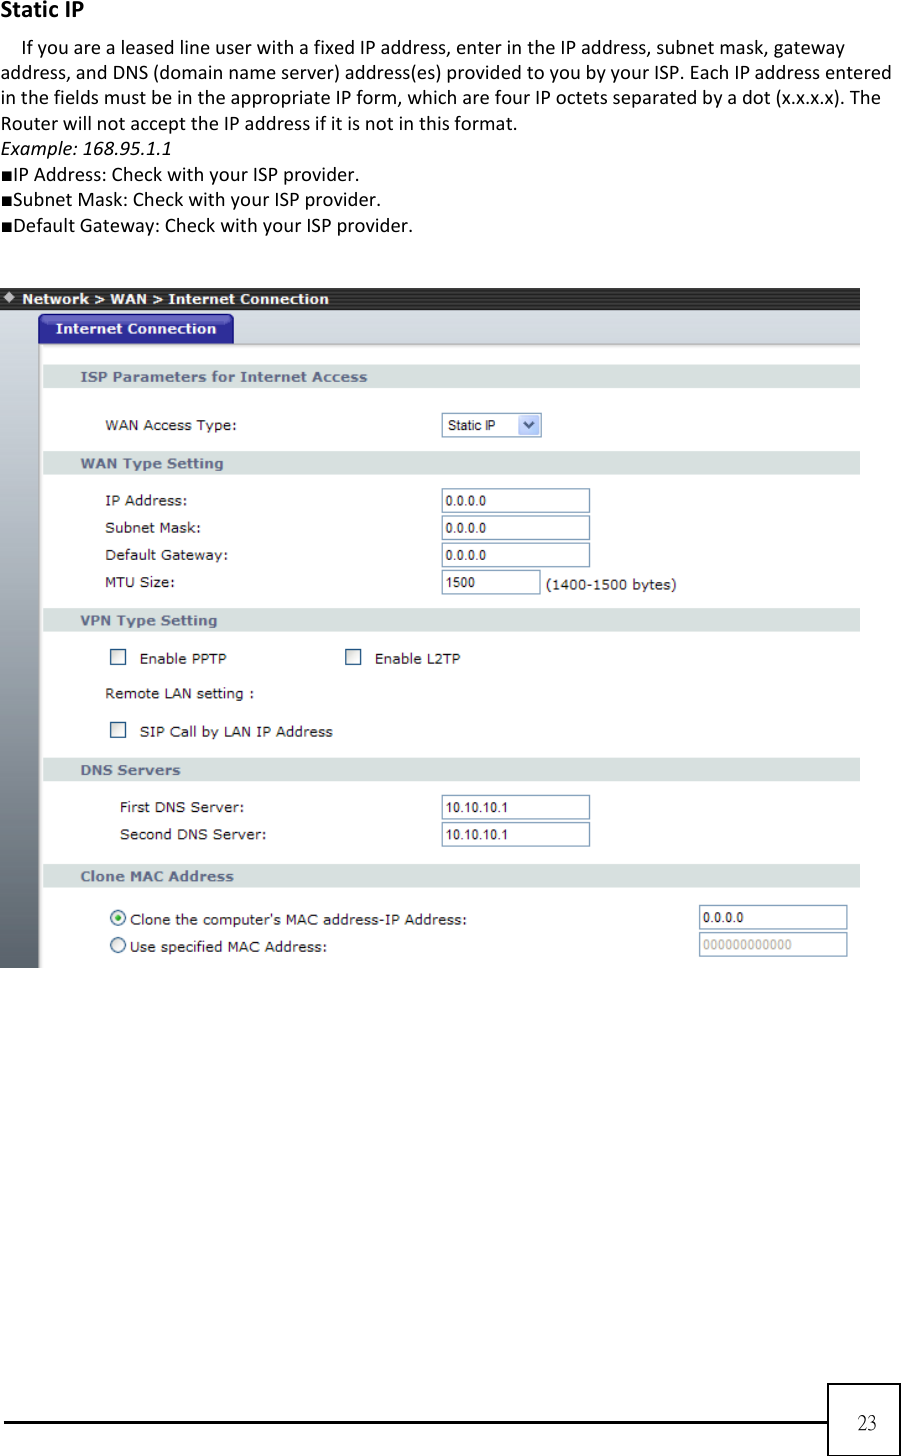  23  Static IP If you are a leased line user with a fixed IP address, enter in the IP address, subnet mask, gateway address, and DNS (domain name server) address(es) provided to you by your ISP. Each IP address entered in the fields must be in the appropriate IP form, which are four IP octets separated by a dot (x.x.x.x). The Router will not accept the IP address if it is not in this format.   Example: 168.95.1.1   ■IP Address: Check with your ISP provider.   ■Subnet Mask: Check with your ISP provider.   ■Default Gateway: Check with your ISP provider.     